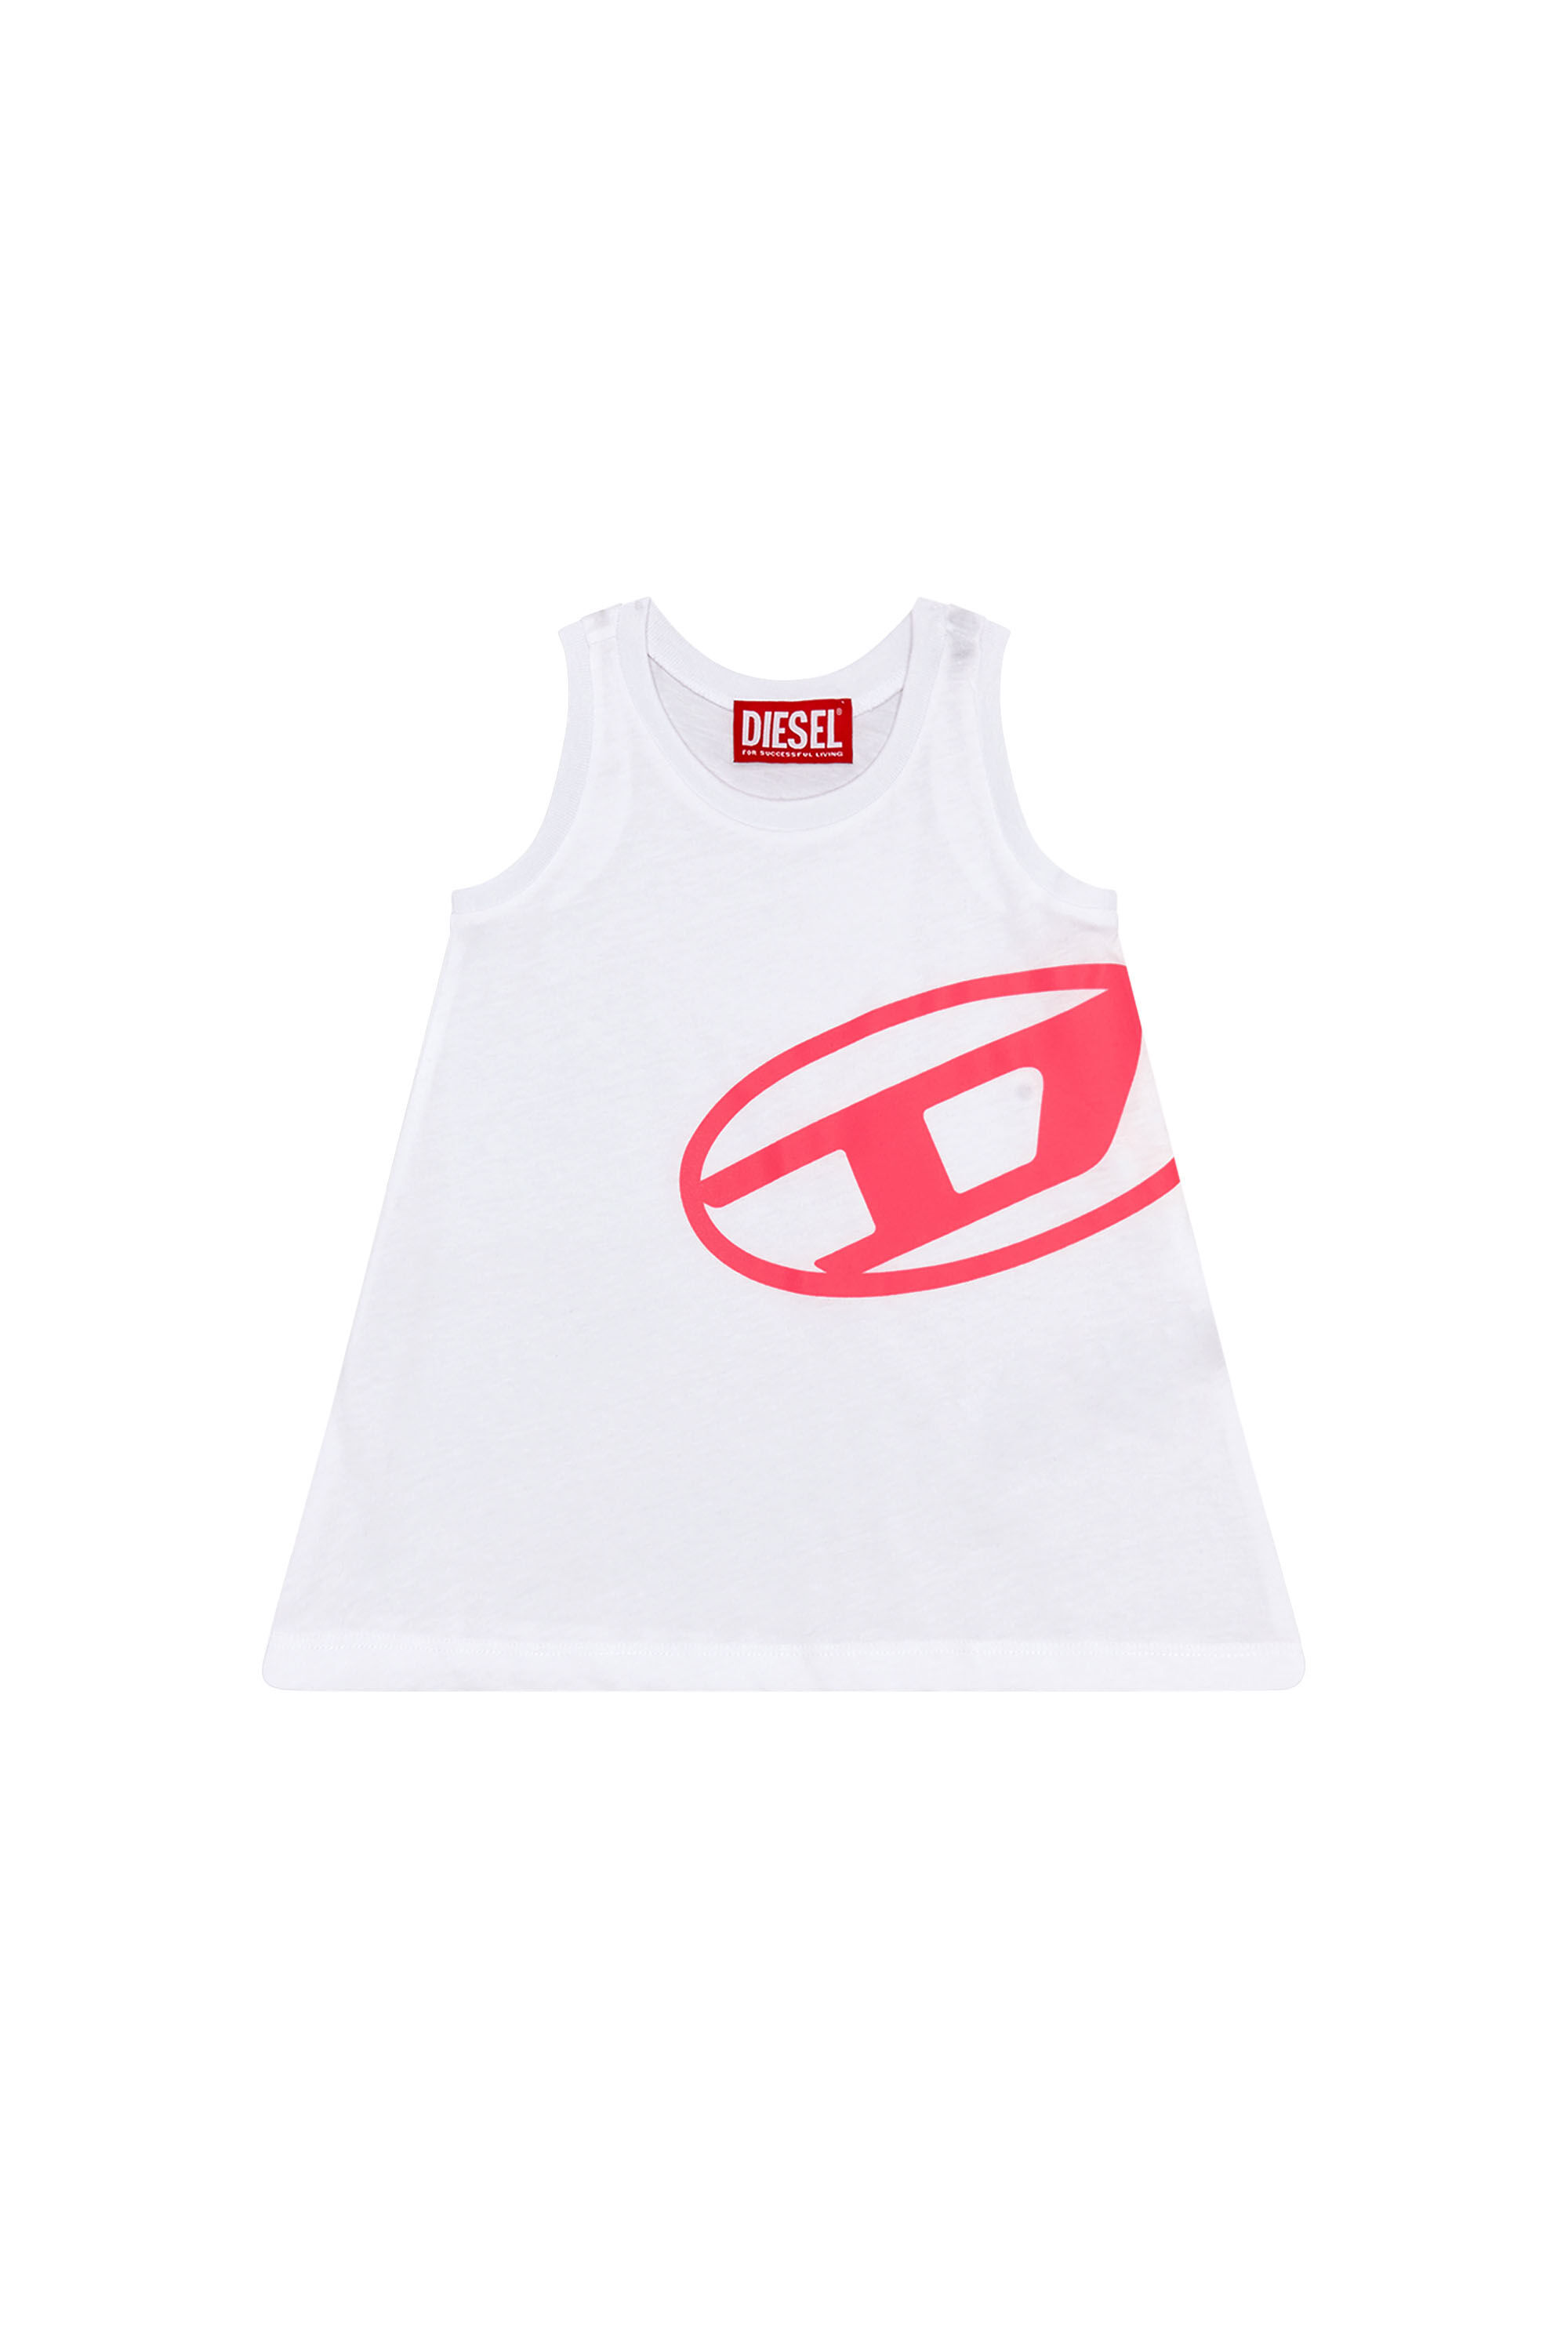 Diesel - MCURGIB, Woman Beach dress with Oval D logo in White - Image 1